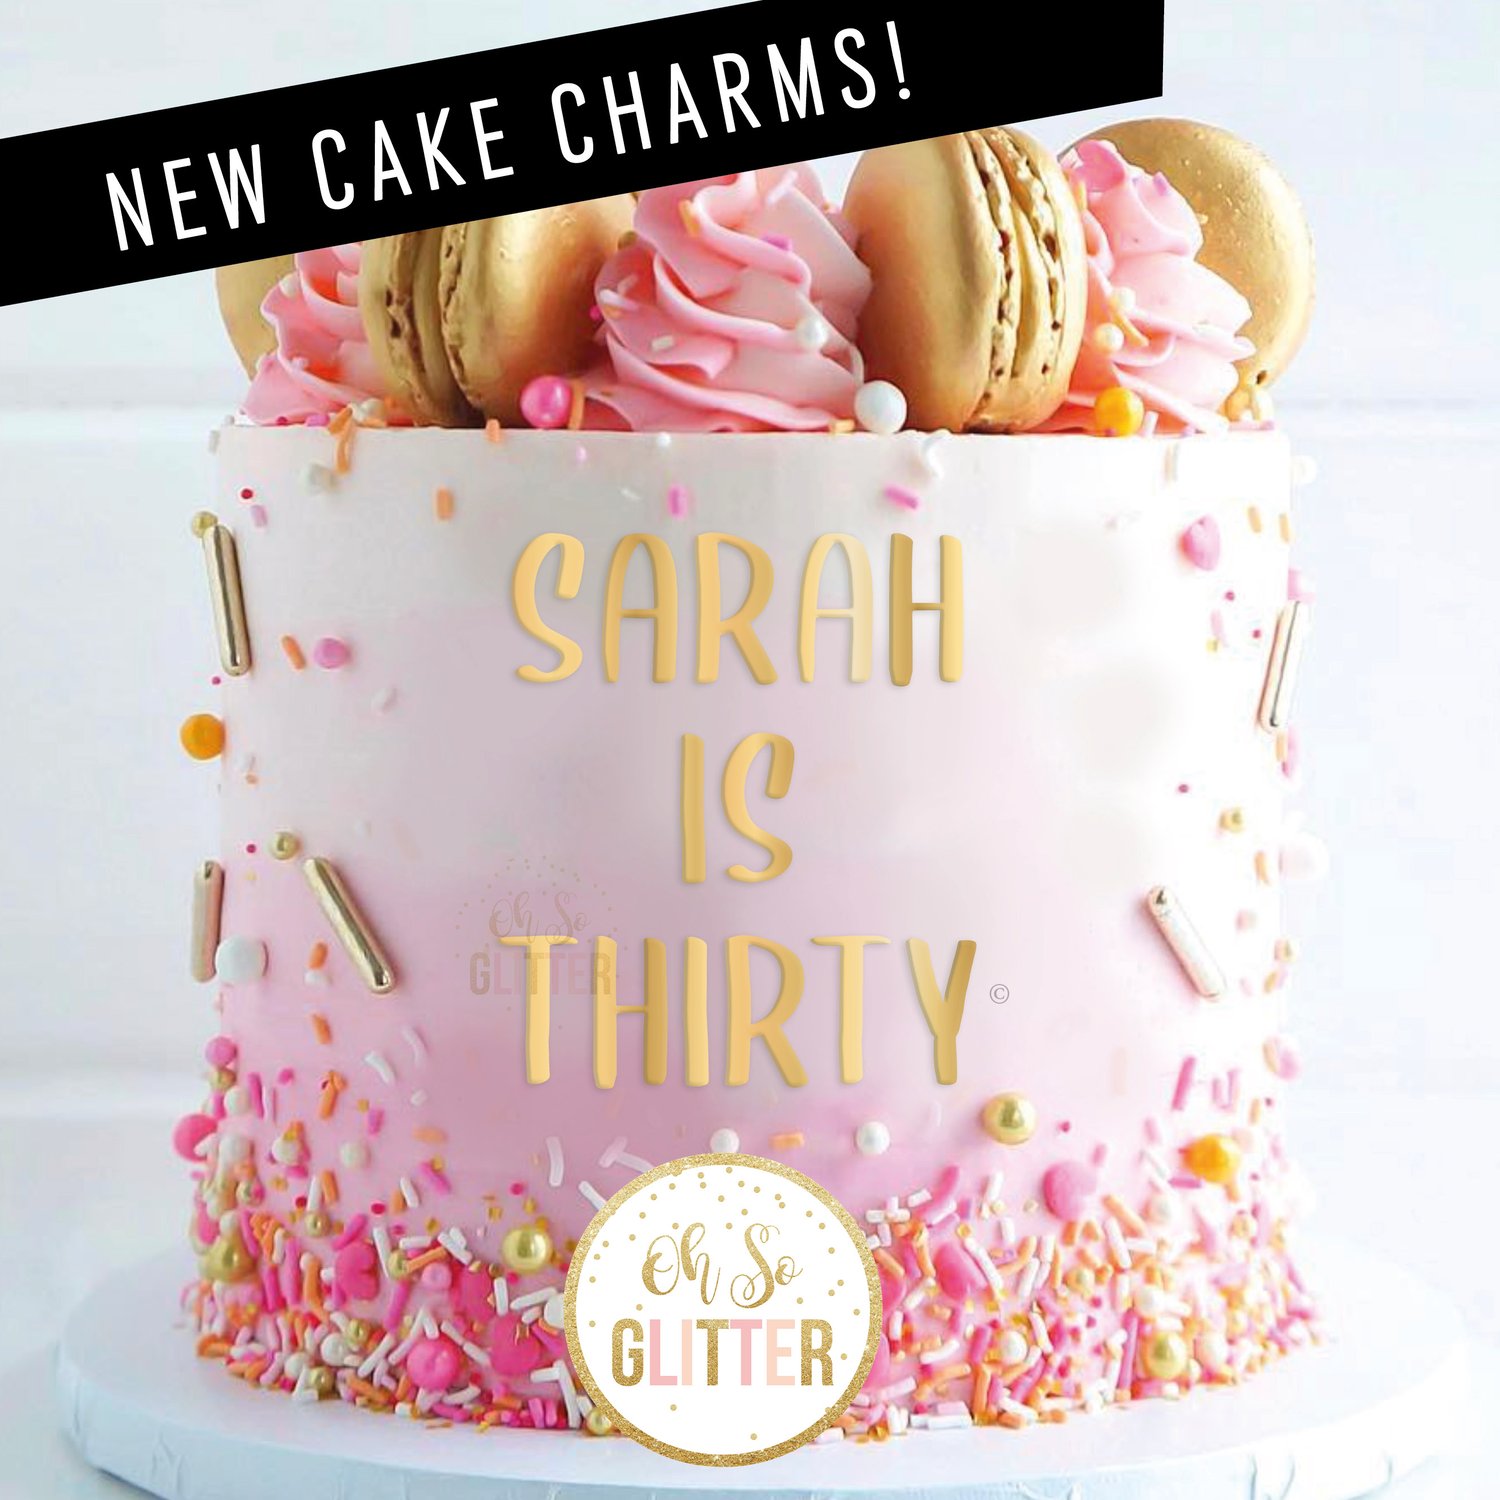 Cakes by Sarah - Pretty pink with gold sprinkles.